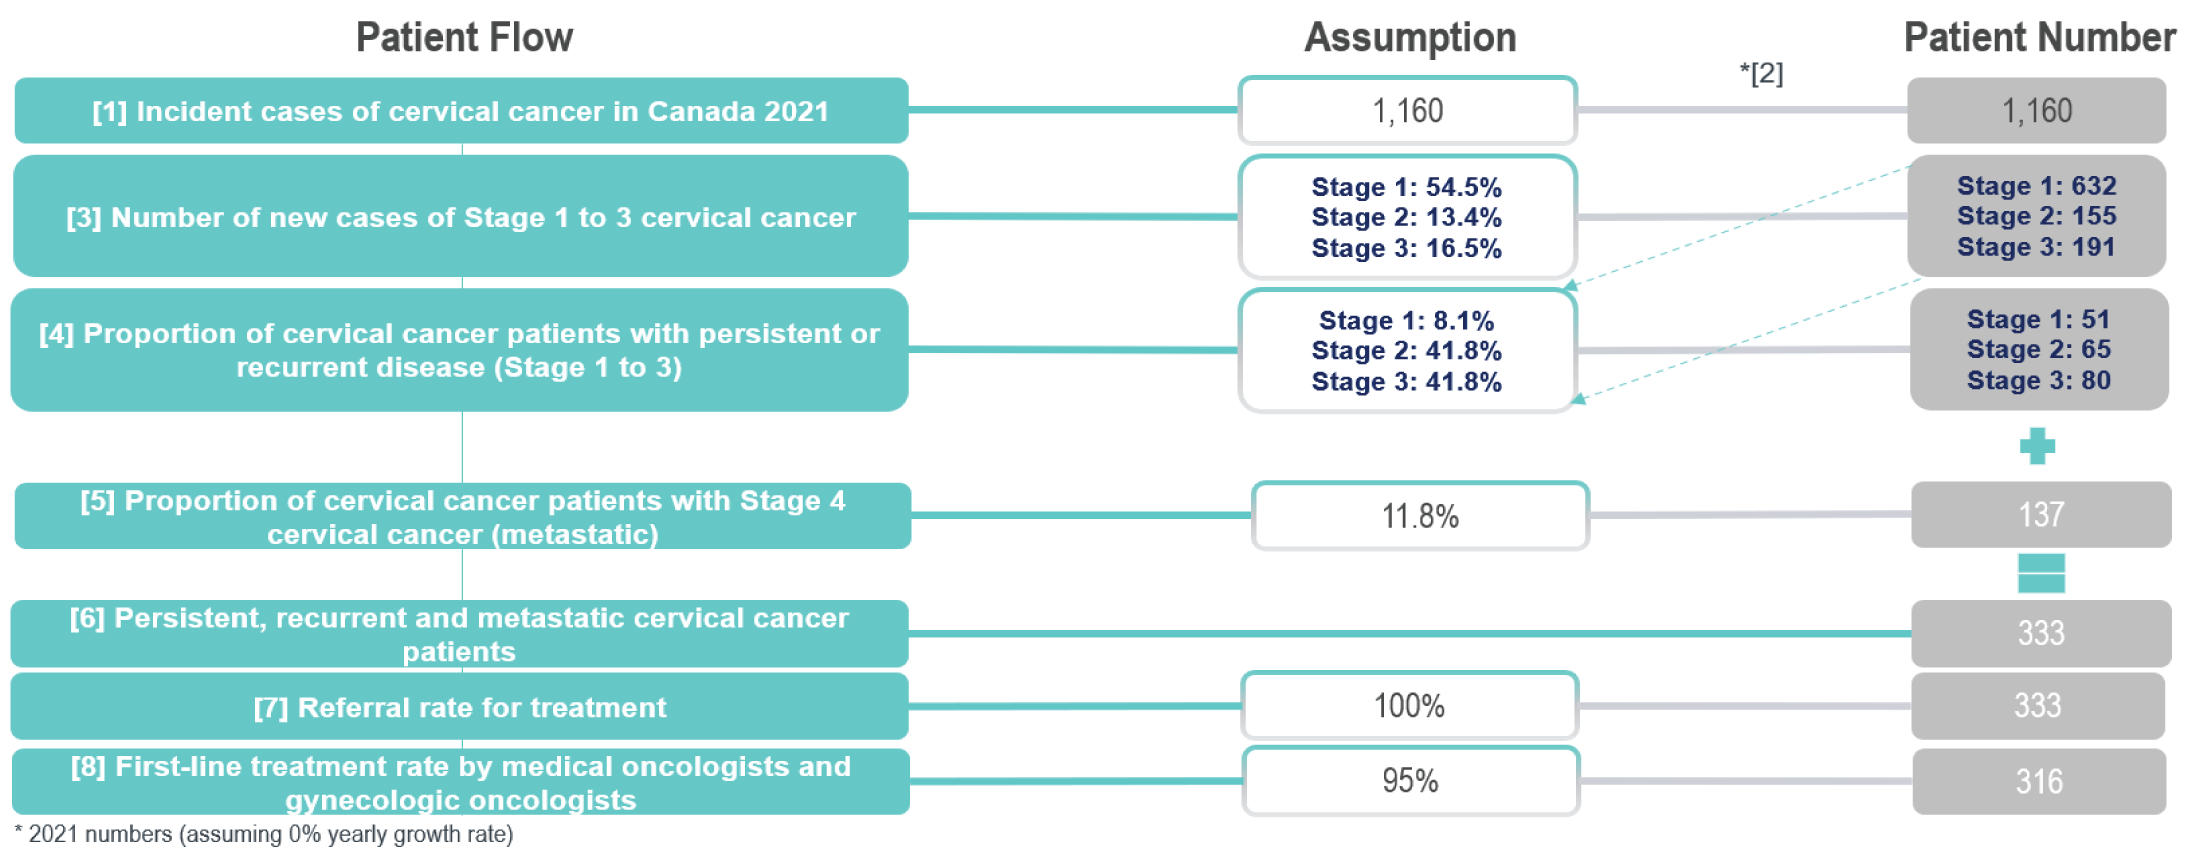 A flow chart describing how the eligible patient population was selected. The flow chart starts with all incident cases of cervical cancer in Canada (1,160) and moves through 7 different eligibility criteria to arrive at the final population estimate (316).